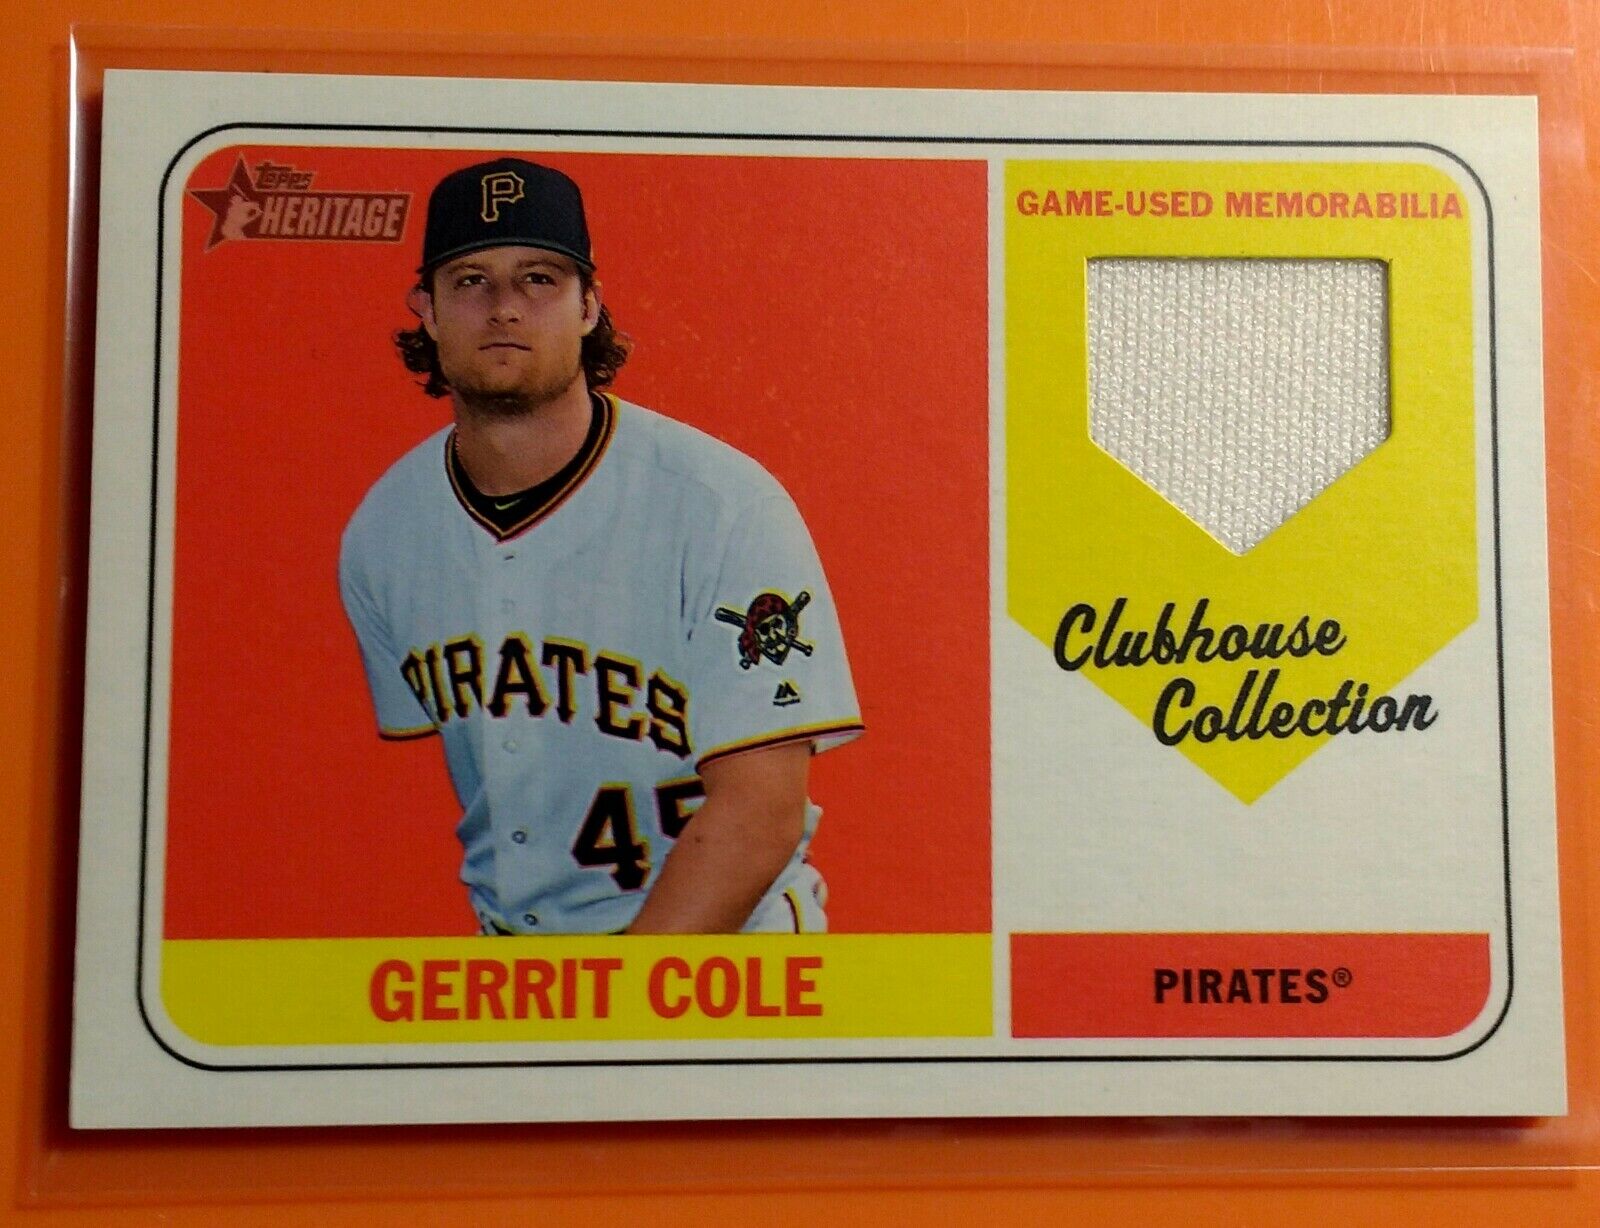 2018 Topps Clubhouse Collection Gerrit Cole Relic Card, Pirates, Yankees.